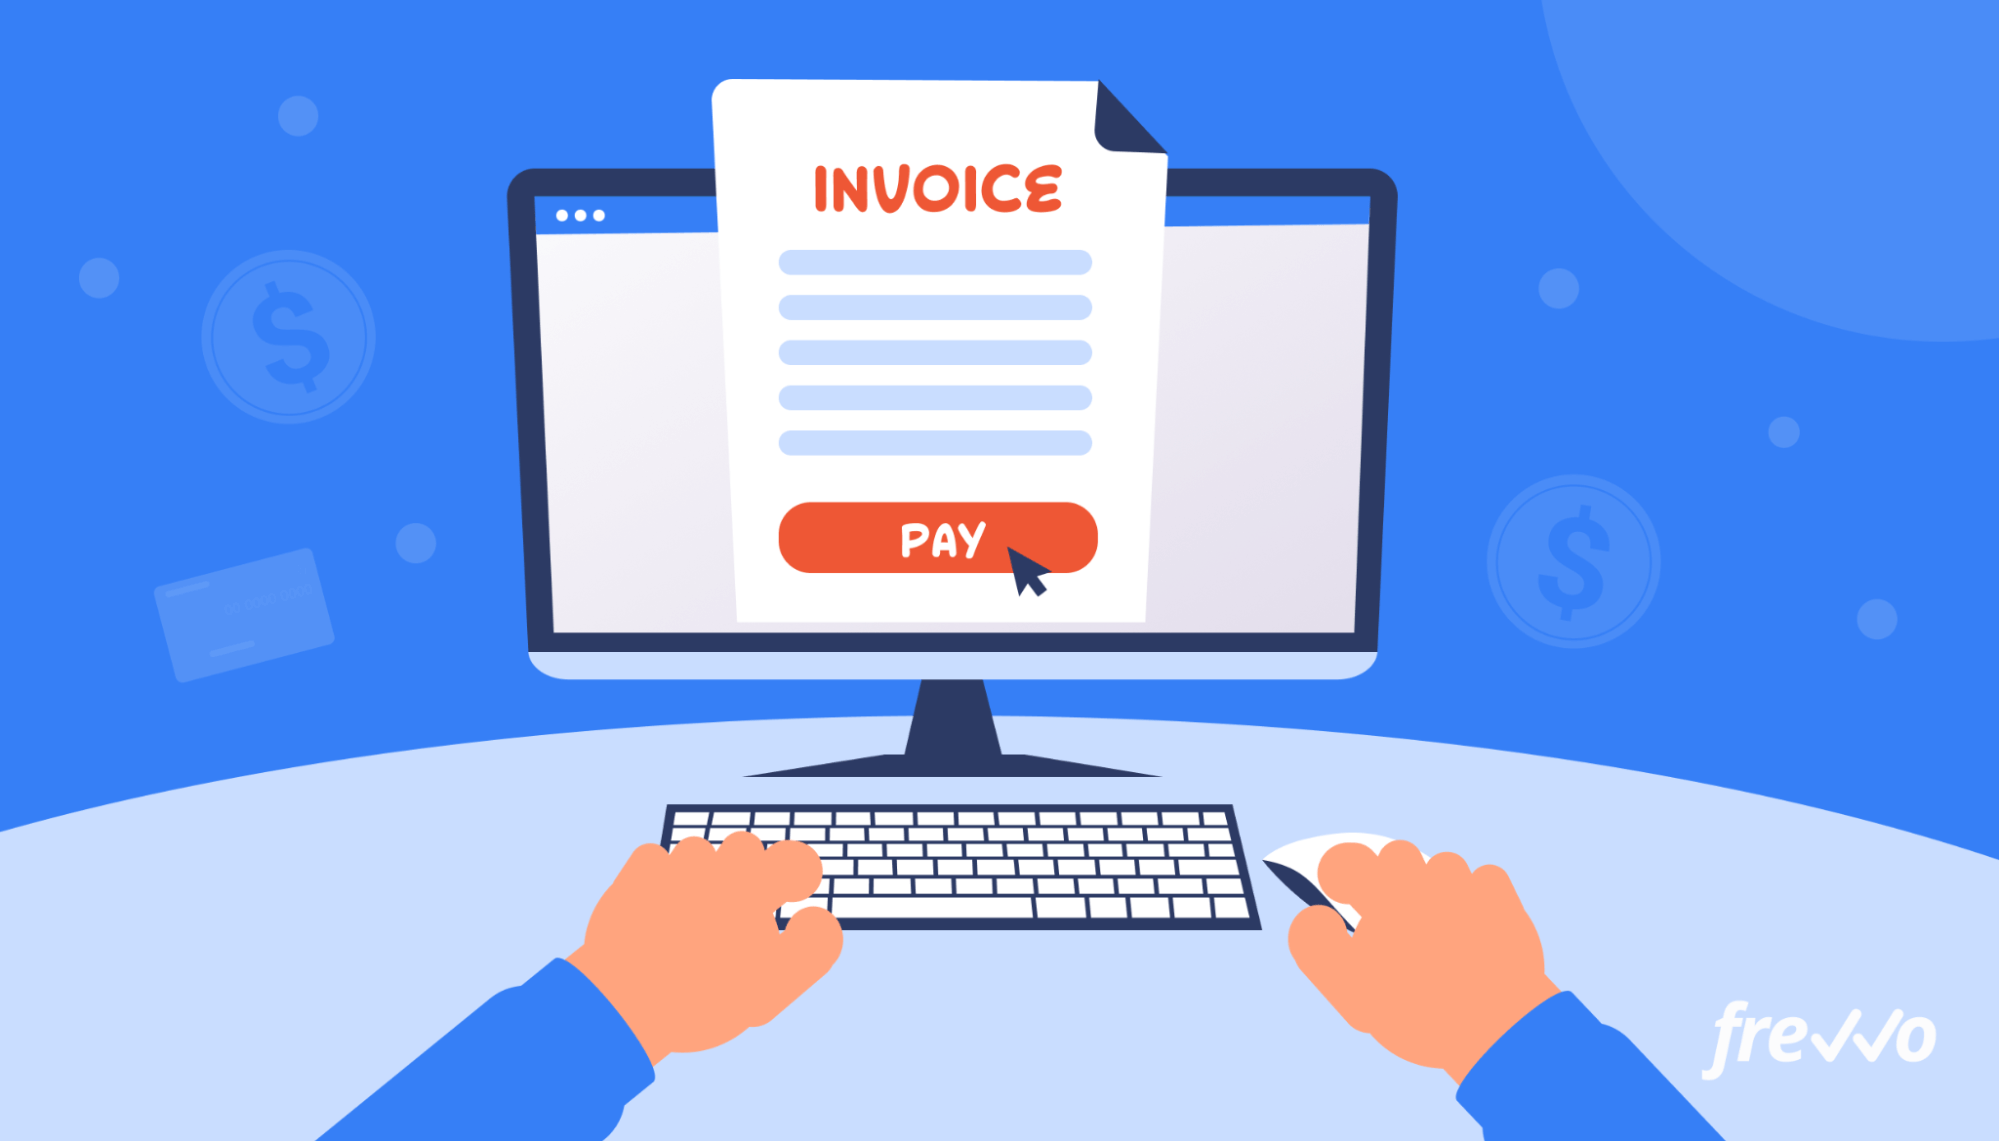 Invoice Exceptions: Where they come from and how to prevent them